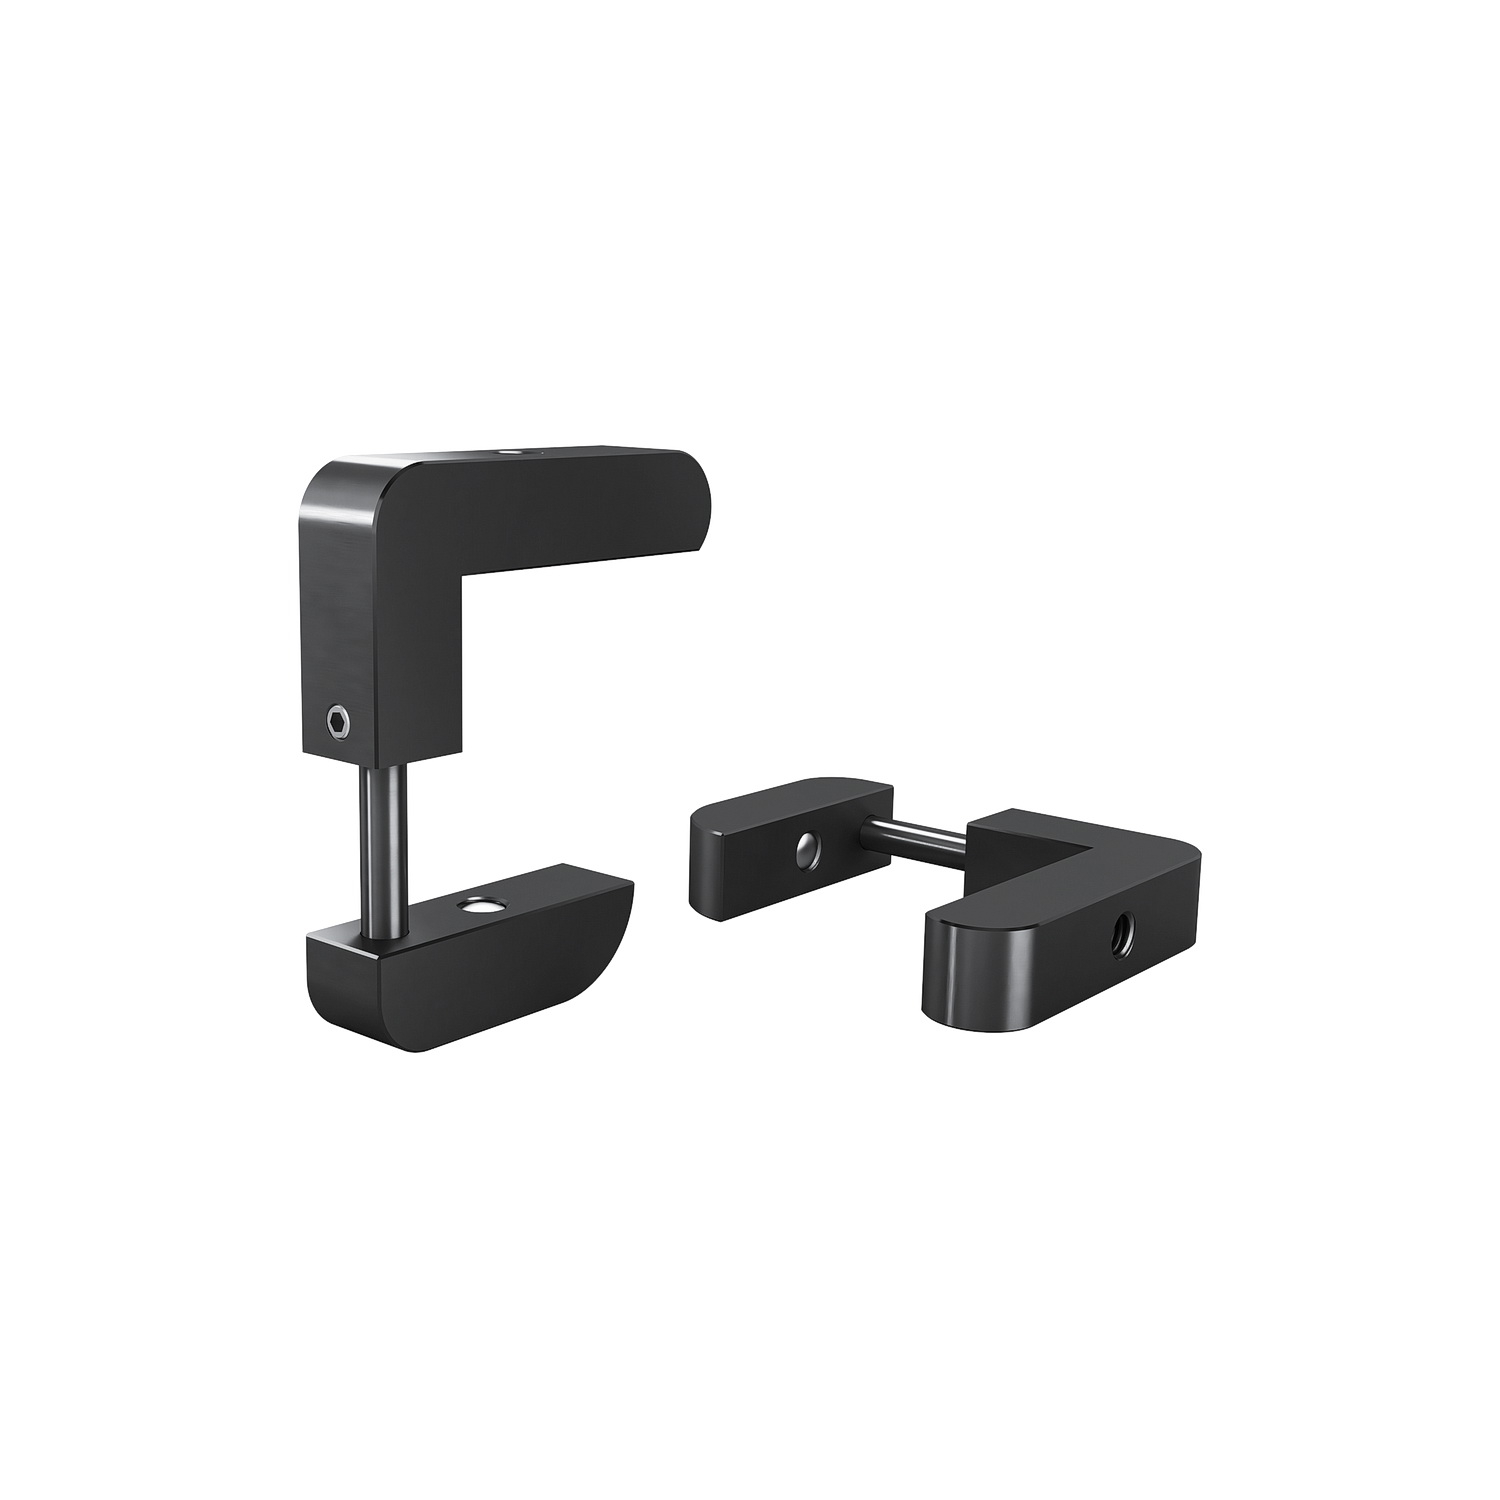 Set of 2, Adjustable Clamp, Aluminum Matte Black Anodized Finish, to Accommodate 3/4'' to 1-1/2'' Counters. M6 Thread on the top